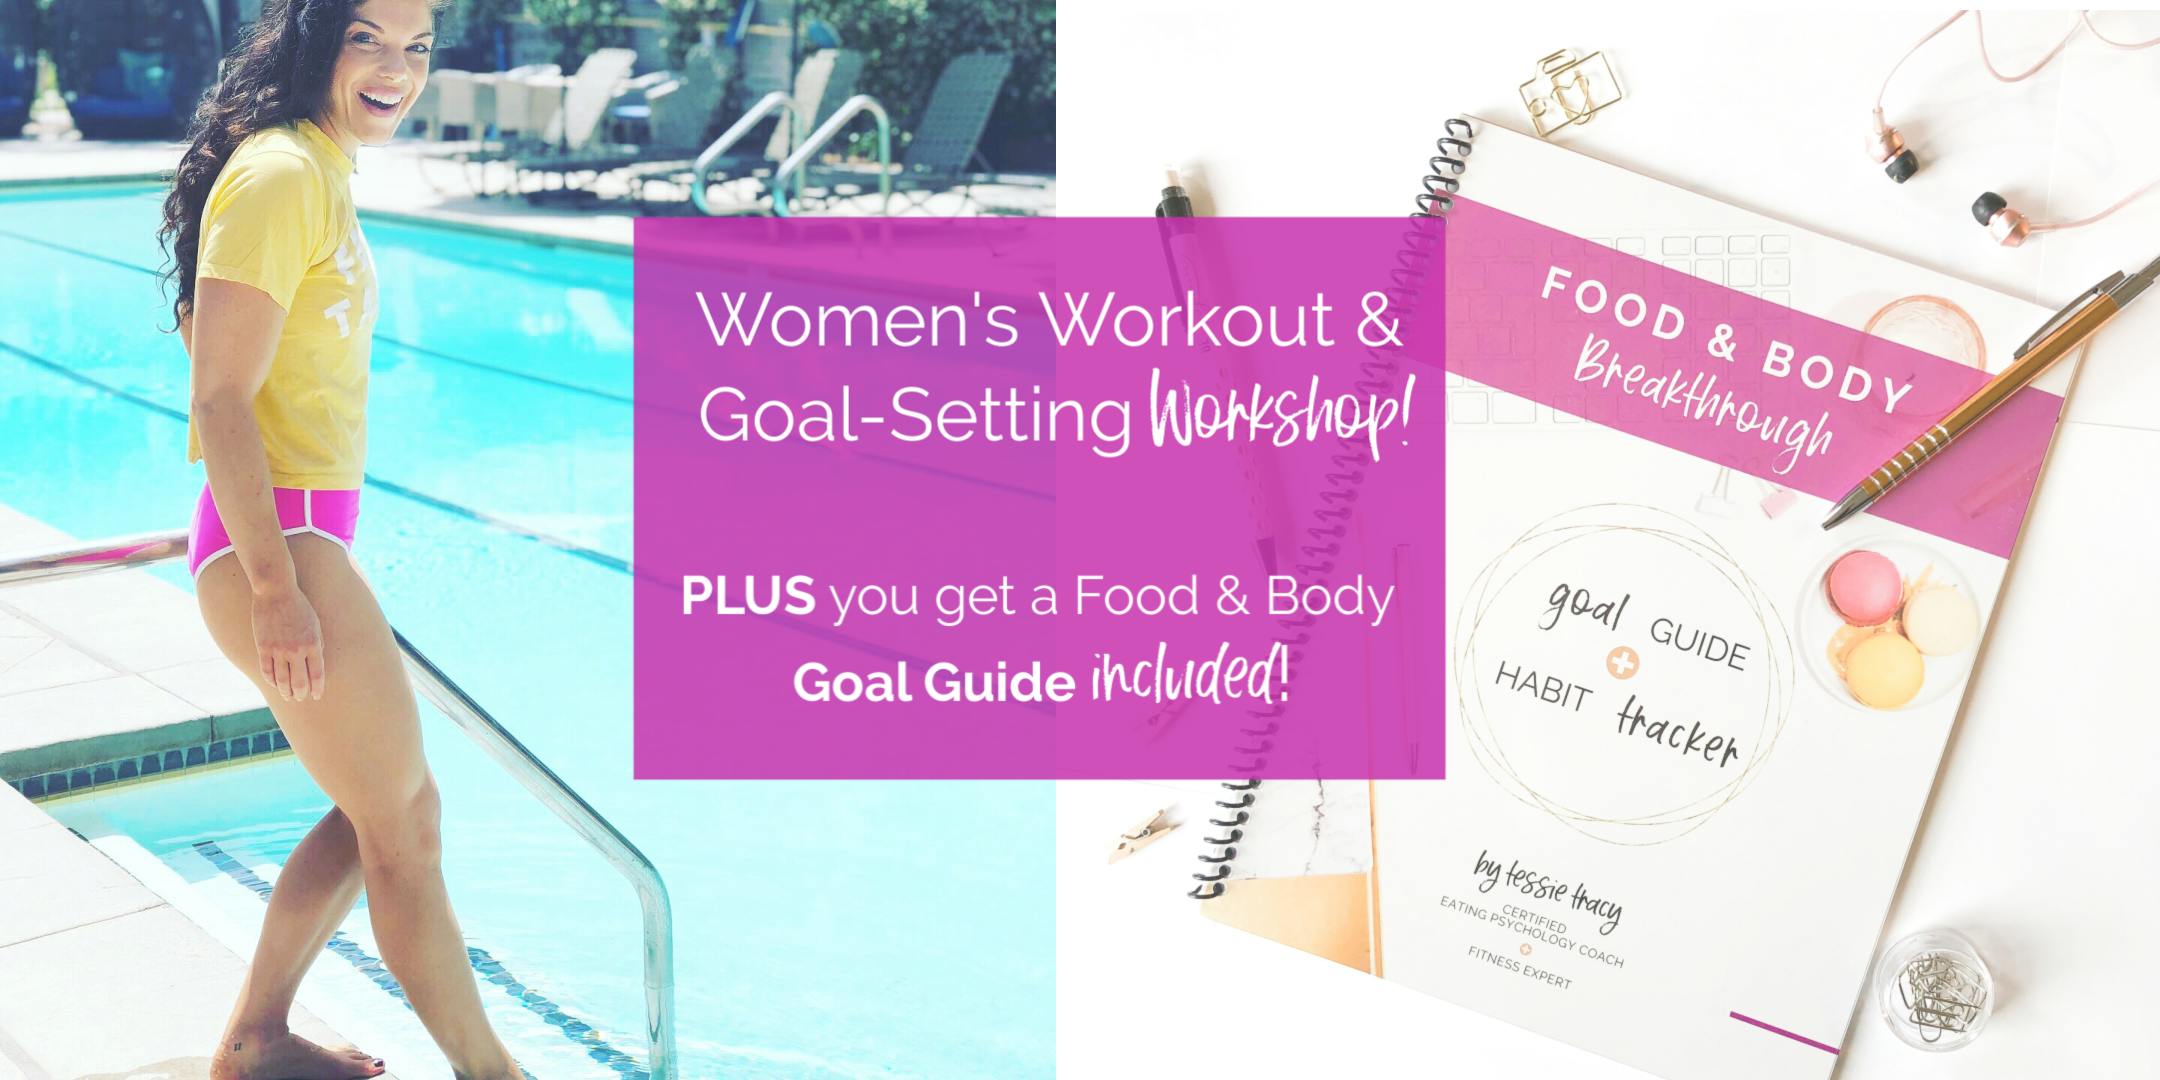 HIIT Workout and Goal-Setting Workshop for Women!